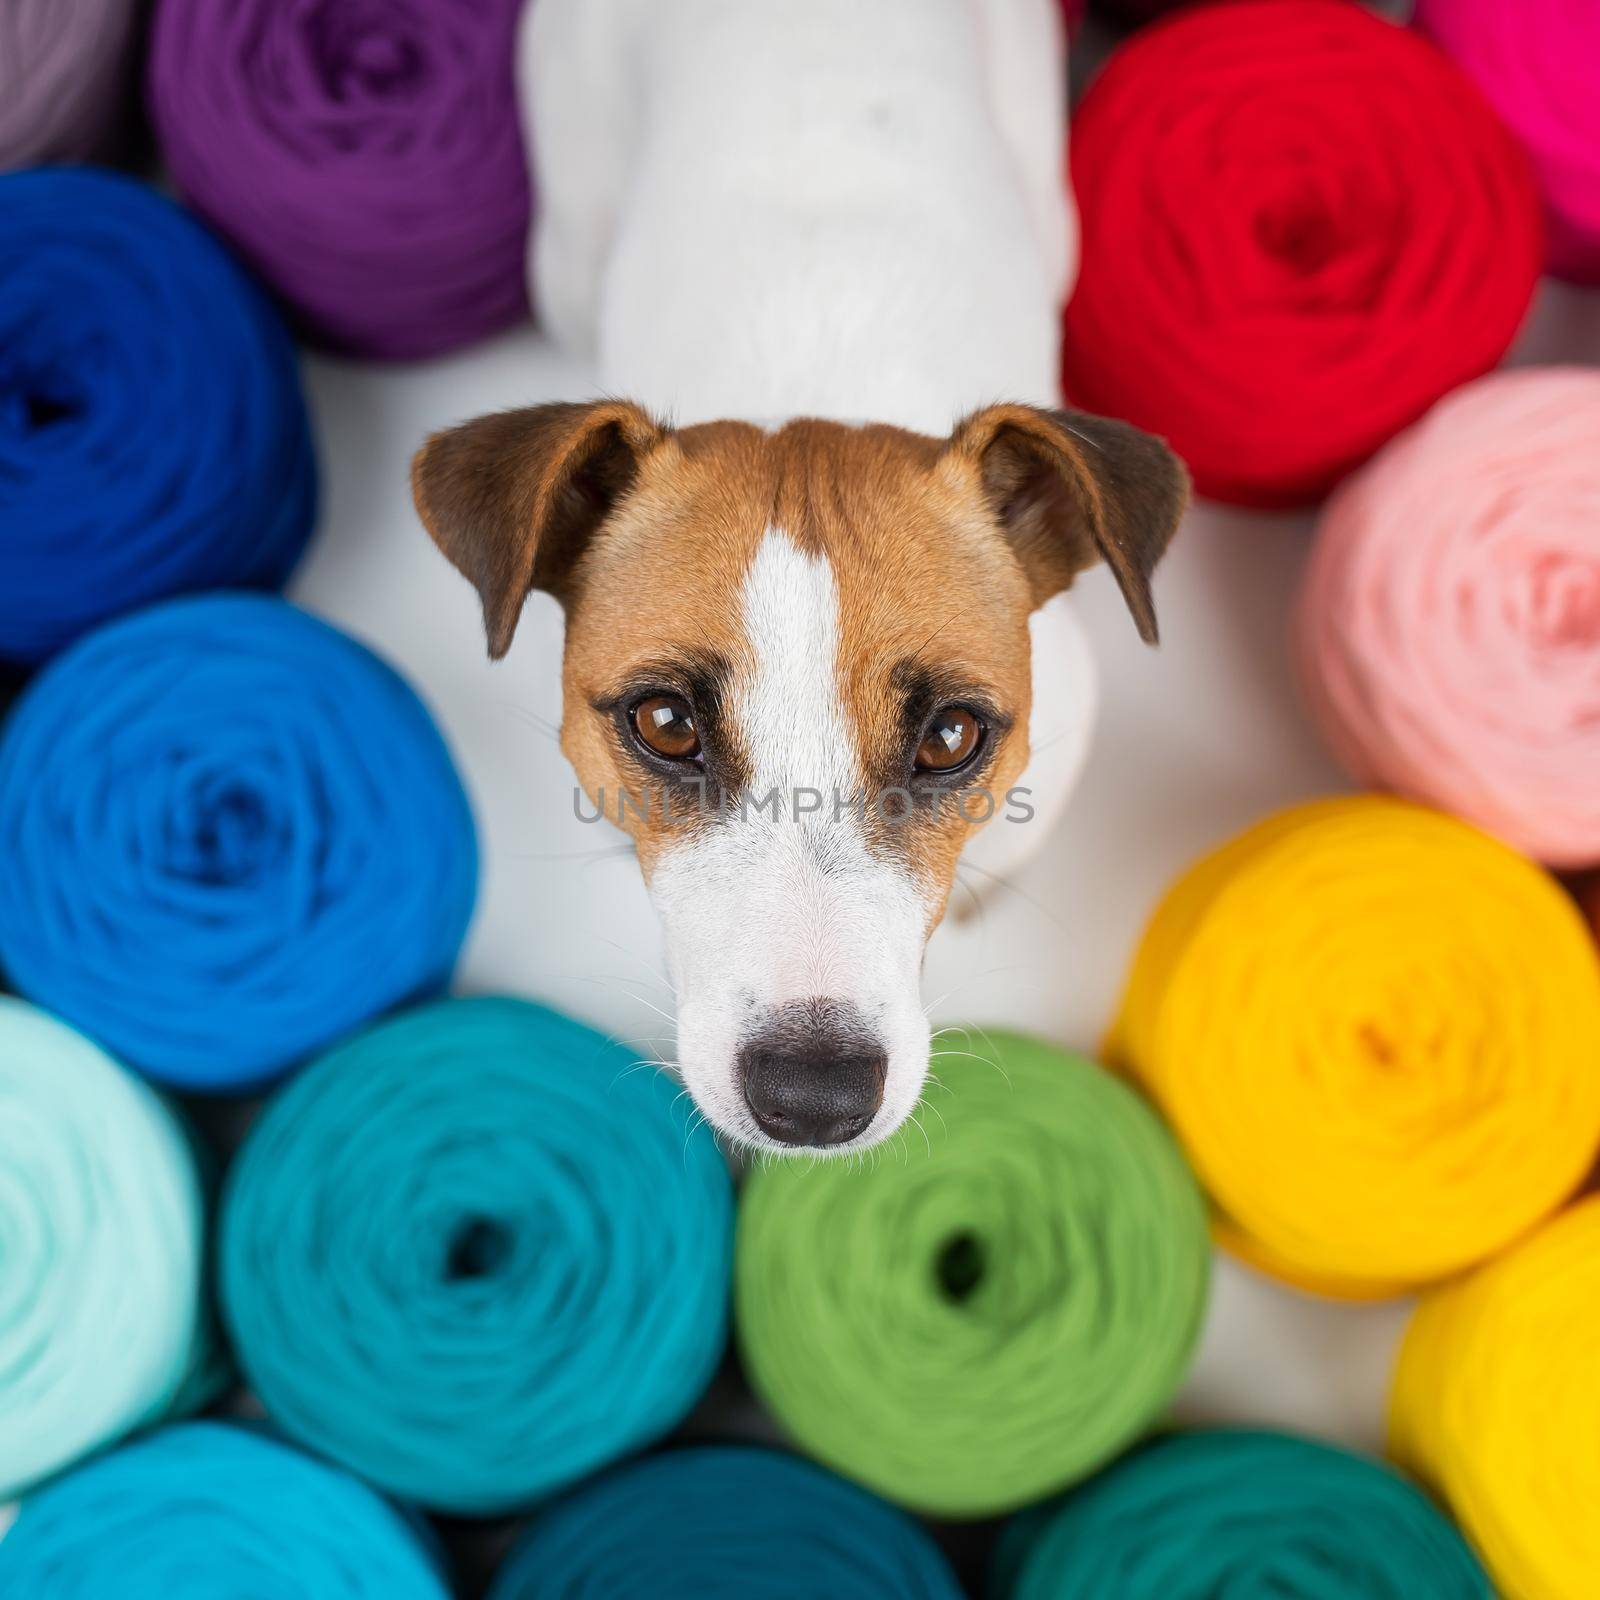 Jack russell terrier dog near multi-colored cotton yarn. The assortment of the store for needlework. Top view. by mrwed54